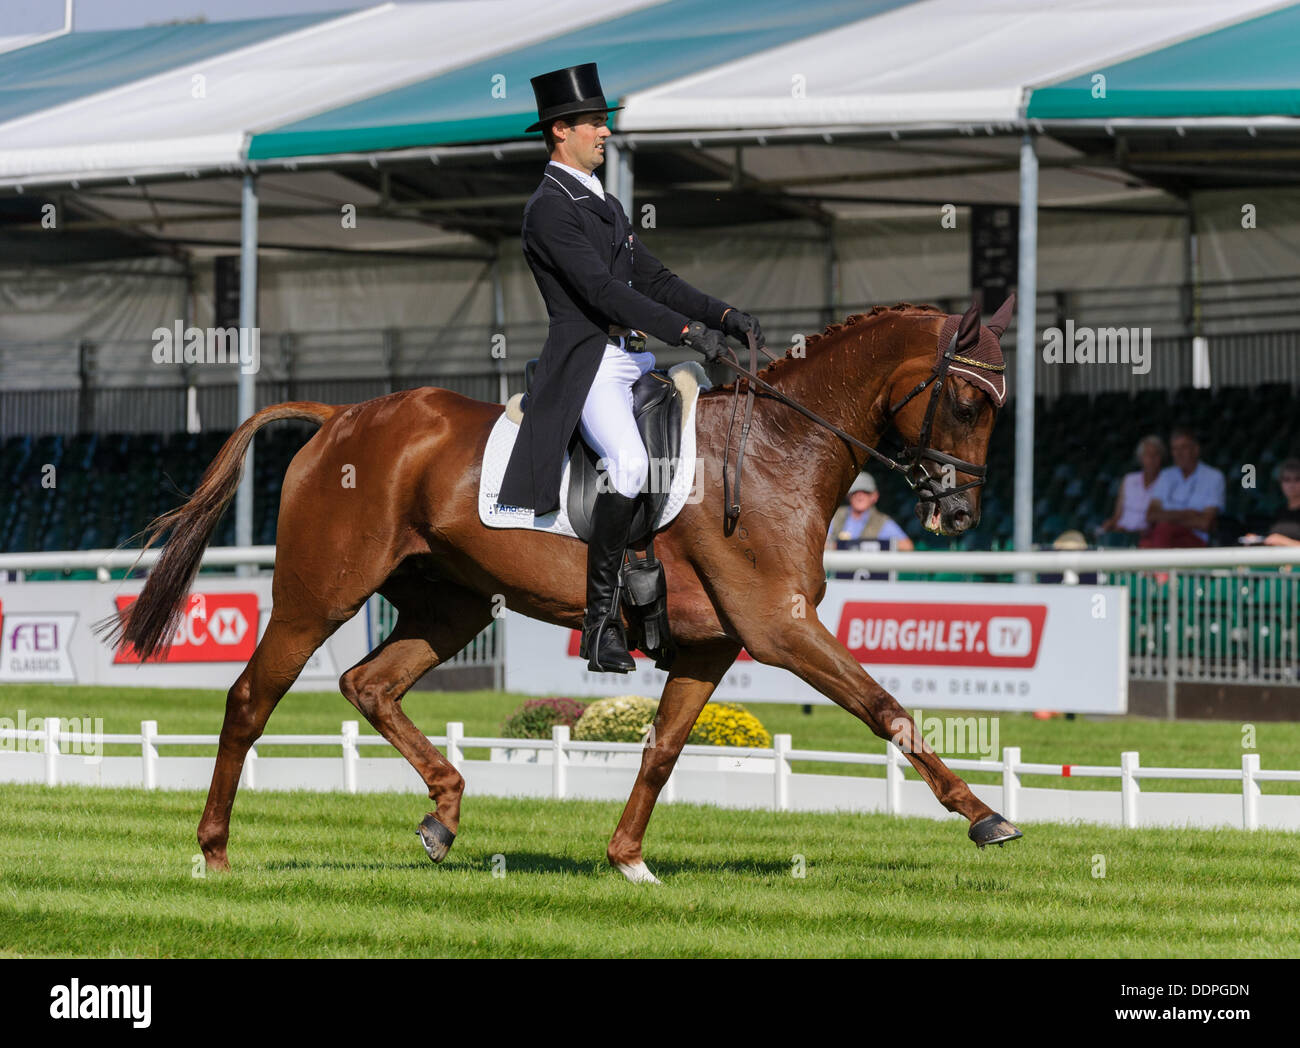 Burghley Horse Trials, Stamford, Lincolnshire, UK. 6th September 2013. Jonathan Paget and CLIFTON LUSH - The Dressage phase. Credit:  Nico Morgan/Alamy Live News Stock Photo